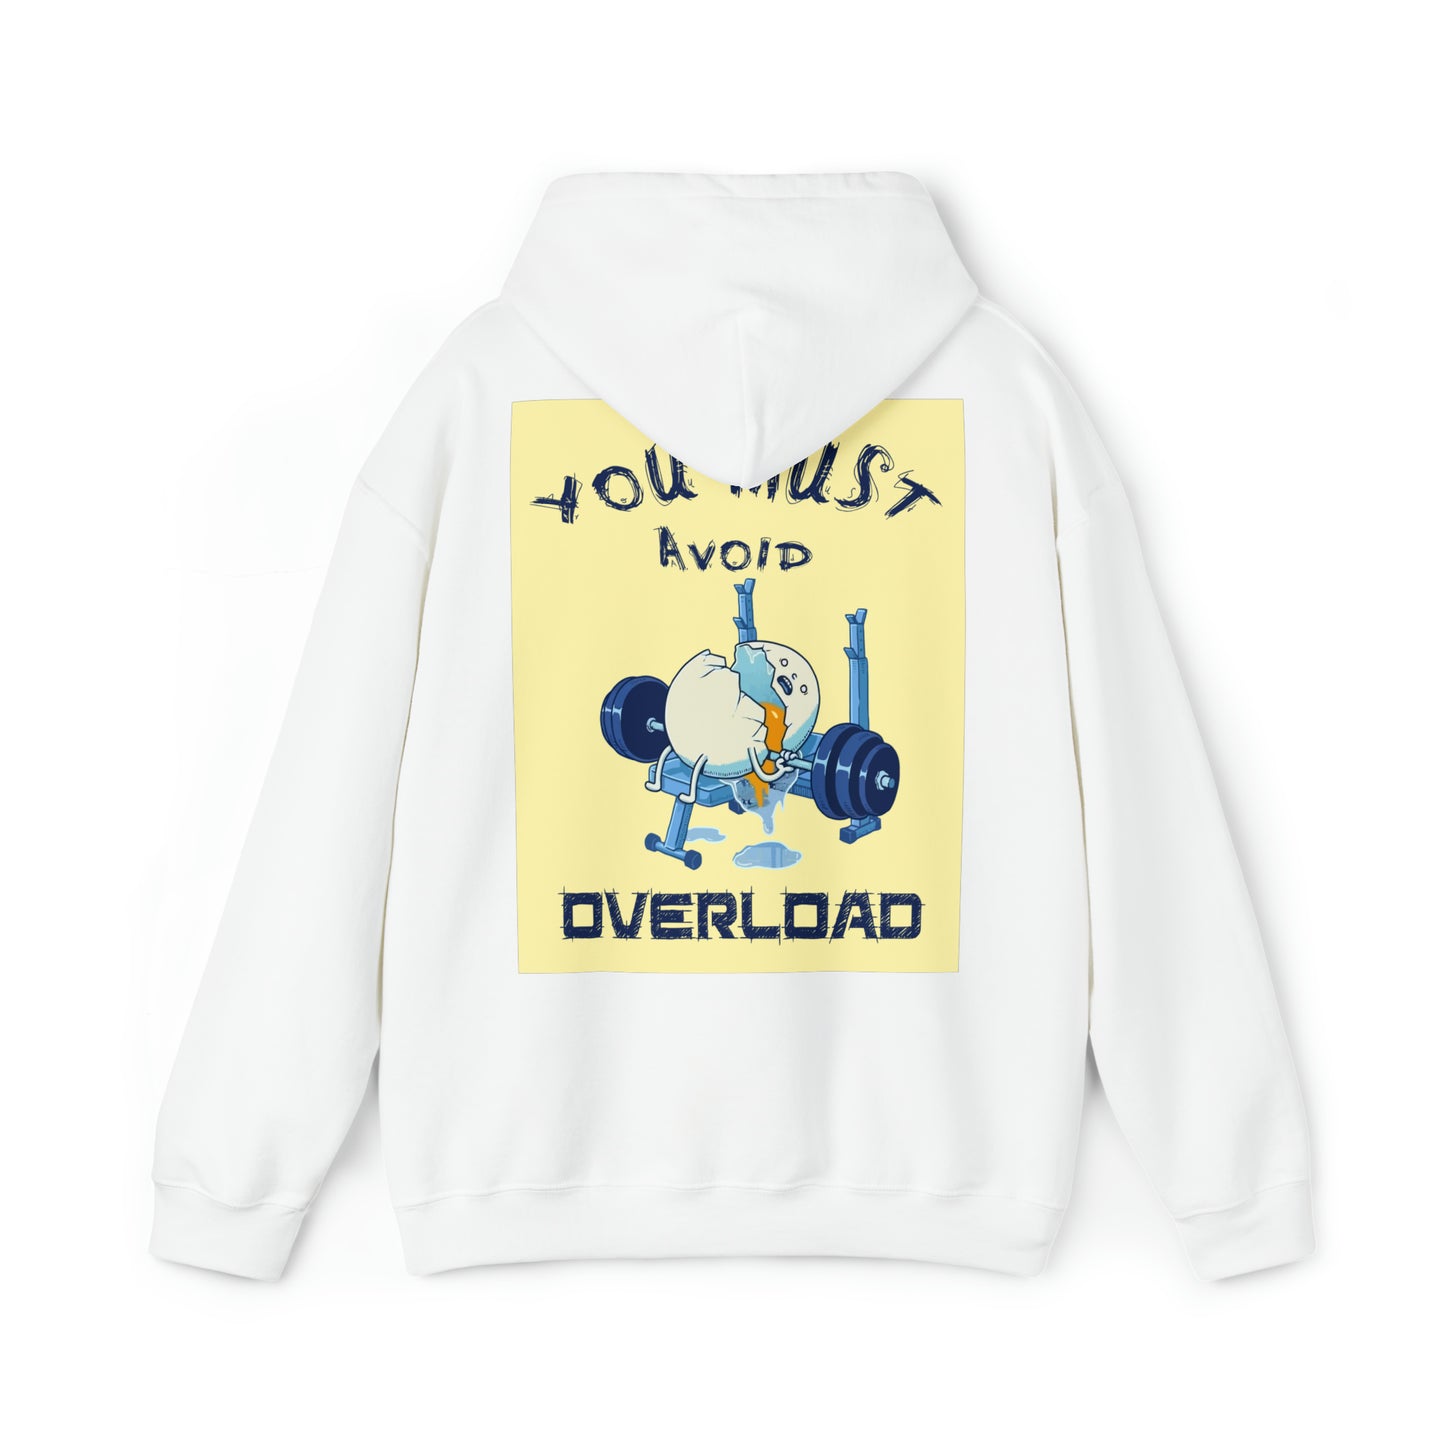 YOU MUST AVOID OVERLOAD x Hoodie